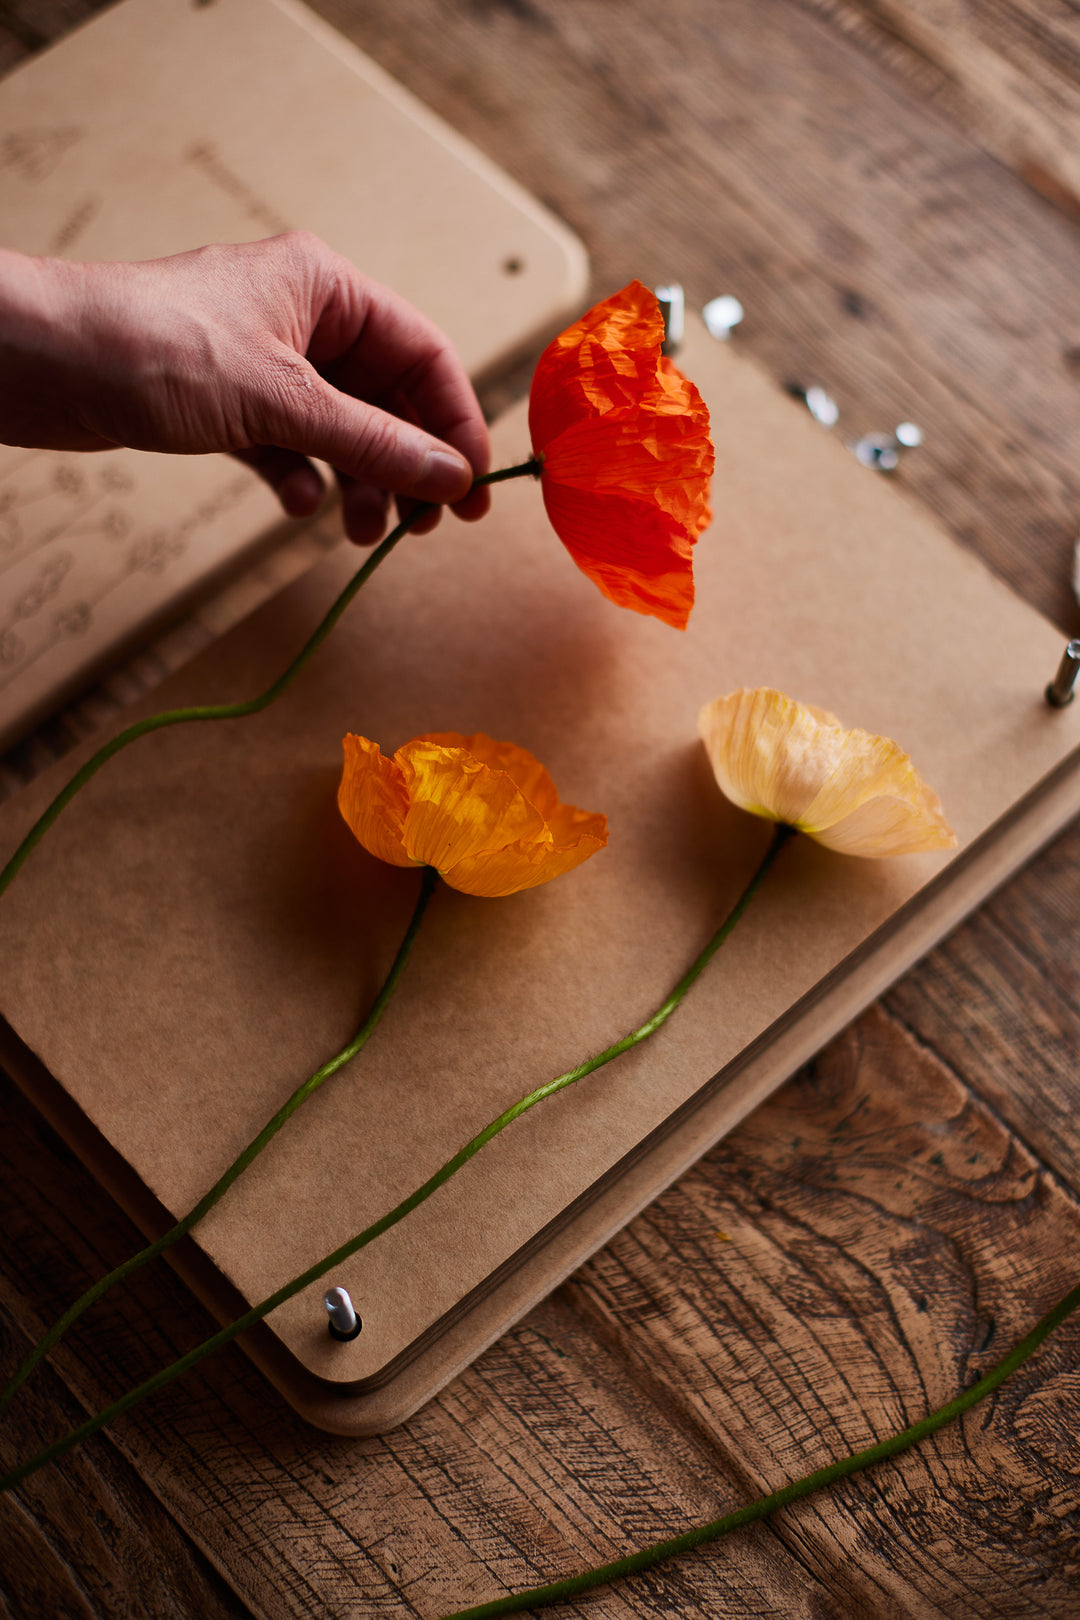 How to press your cut flowers (a simple step by step guide) + preserve their beauty